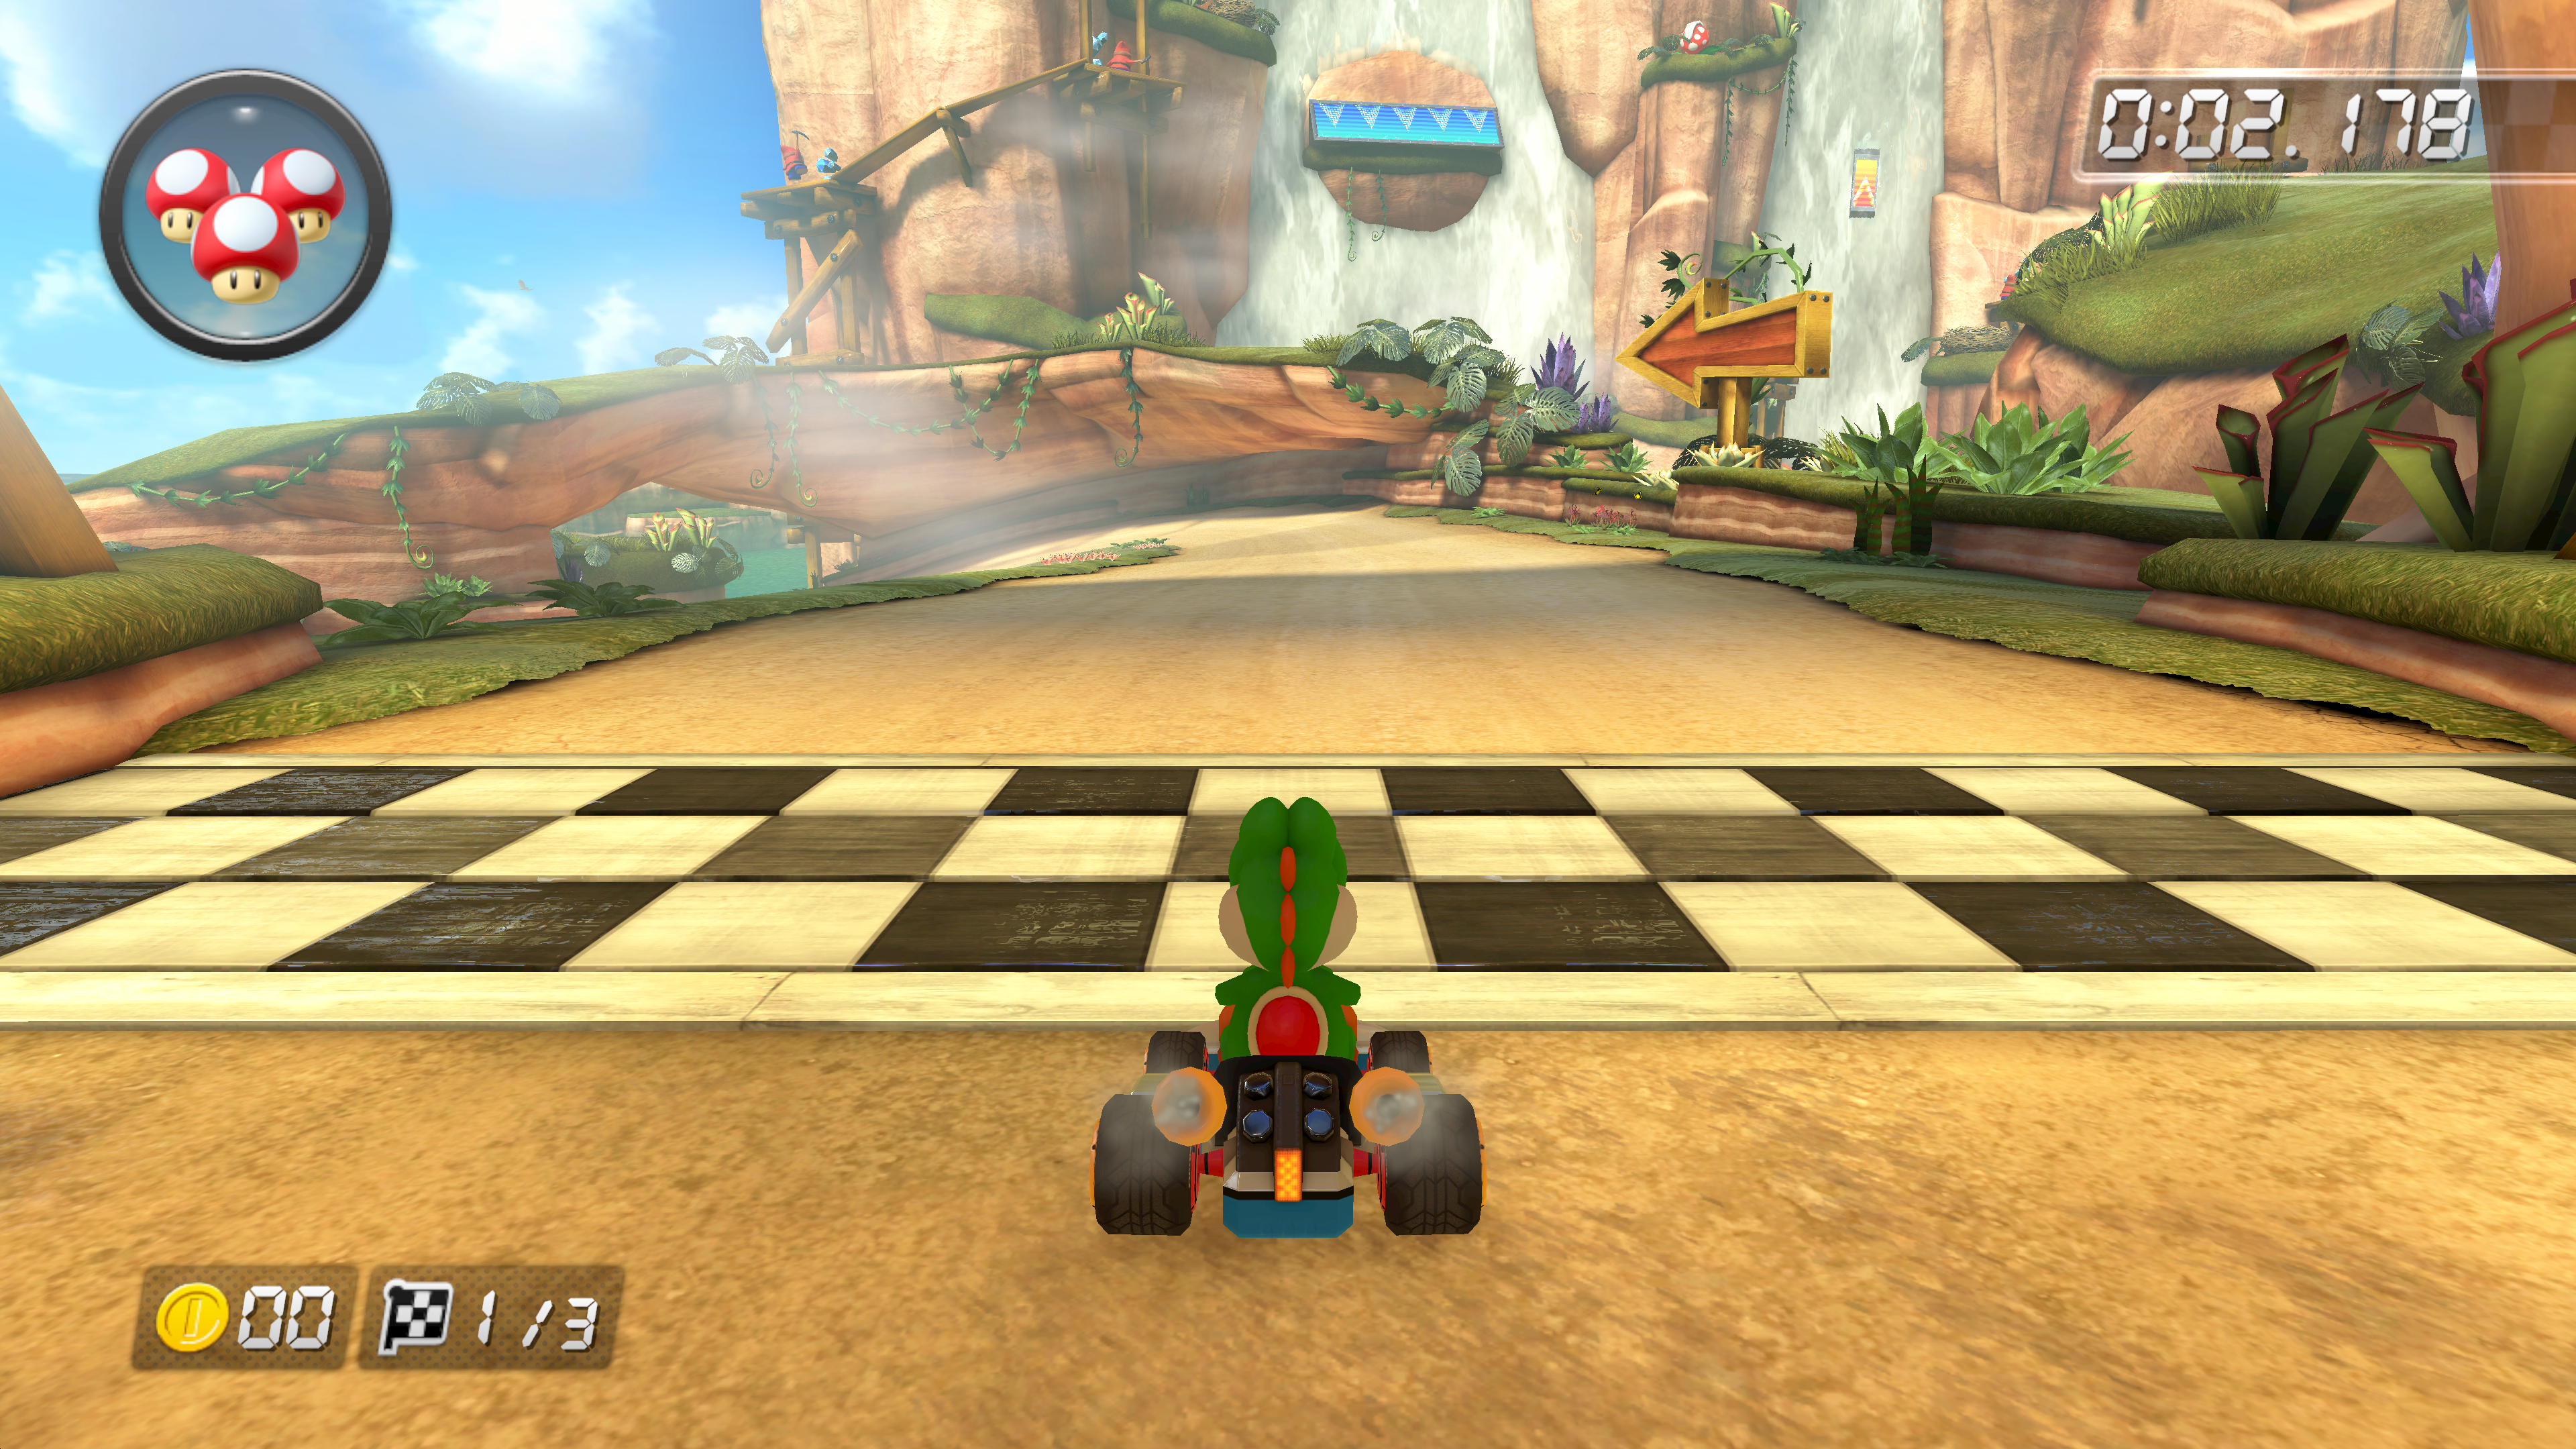 Wii U emulator can now upgrade game graphics to 4K